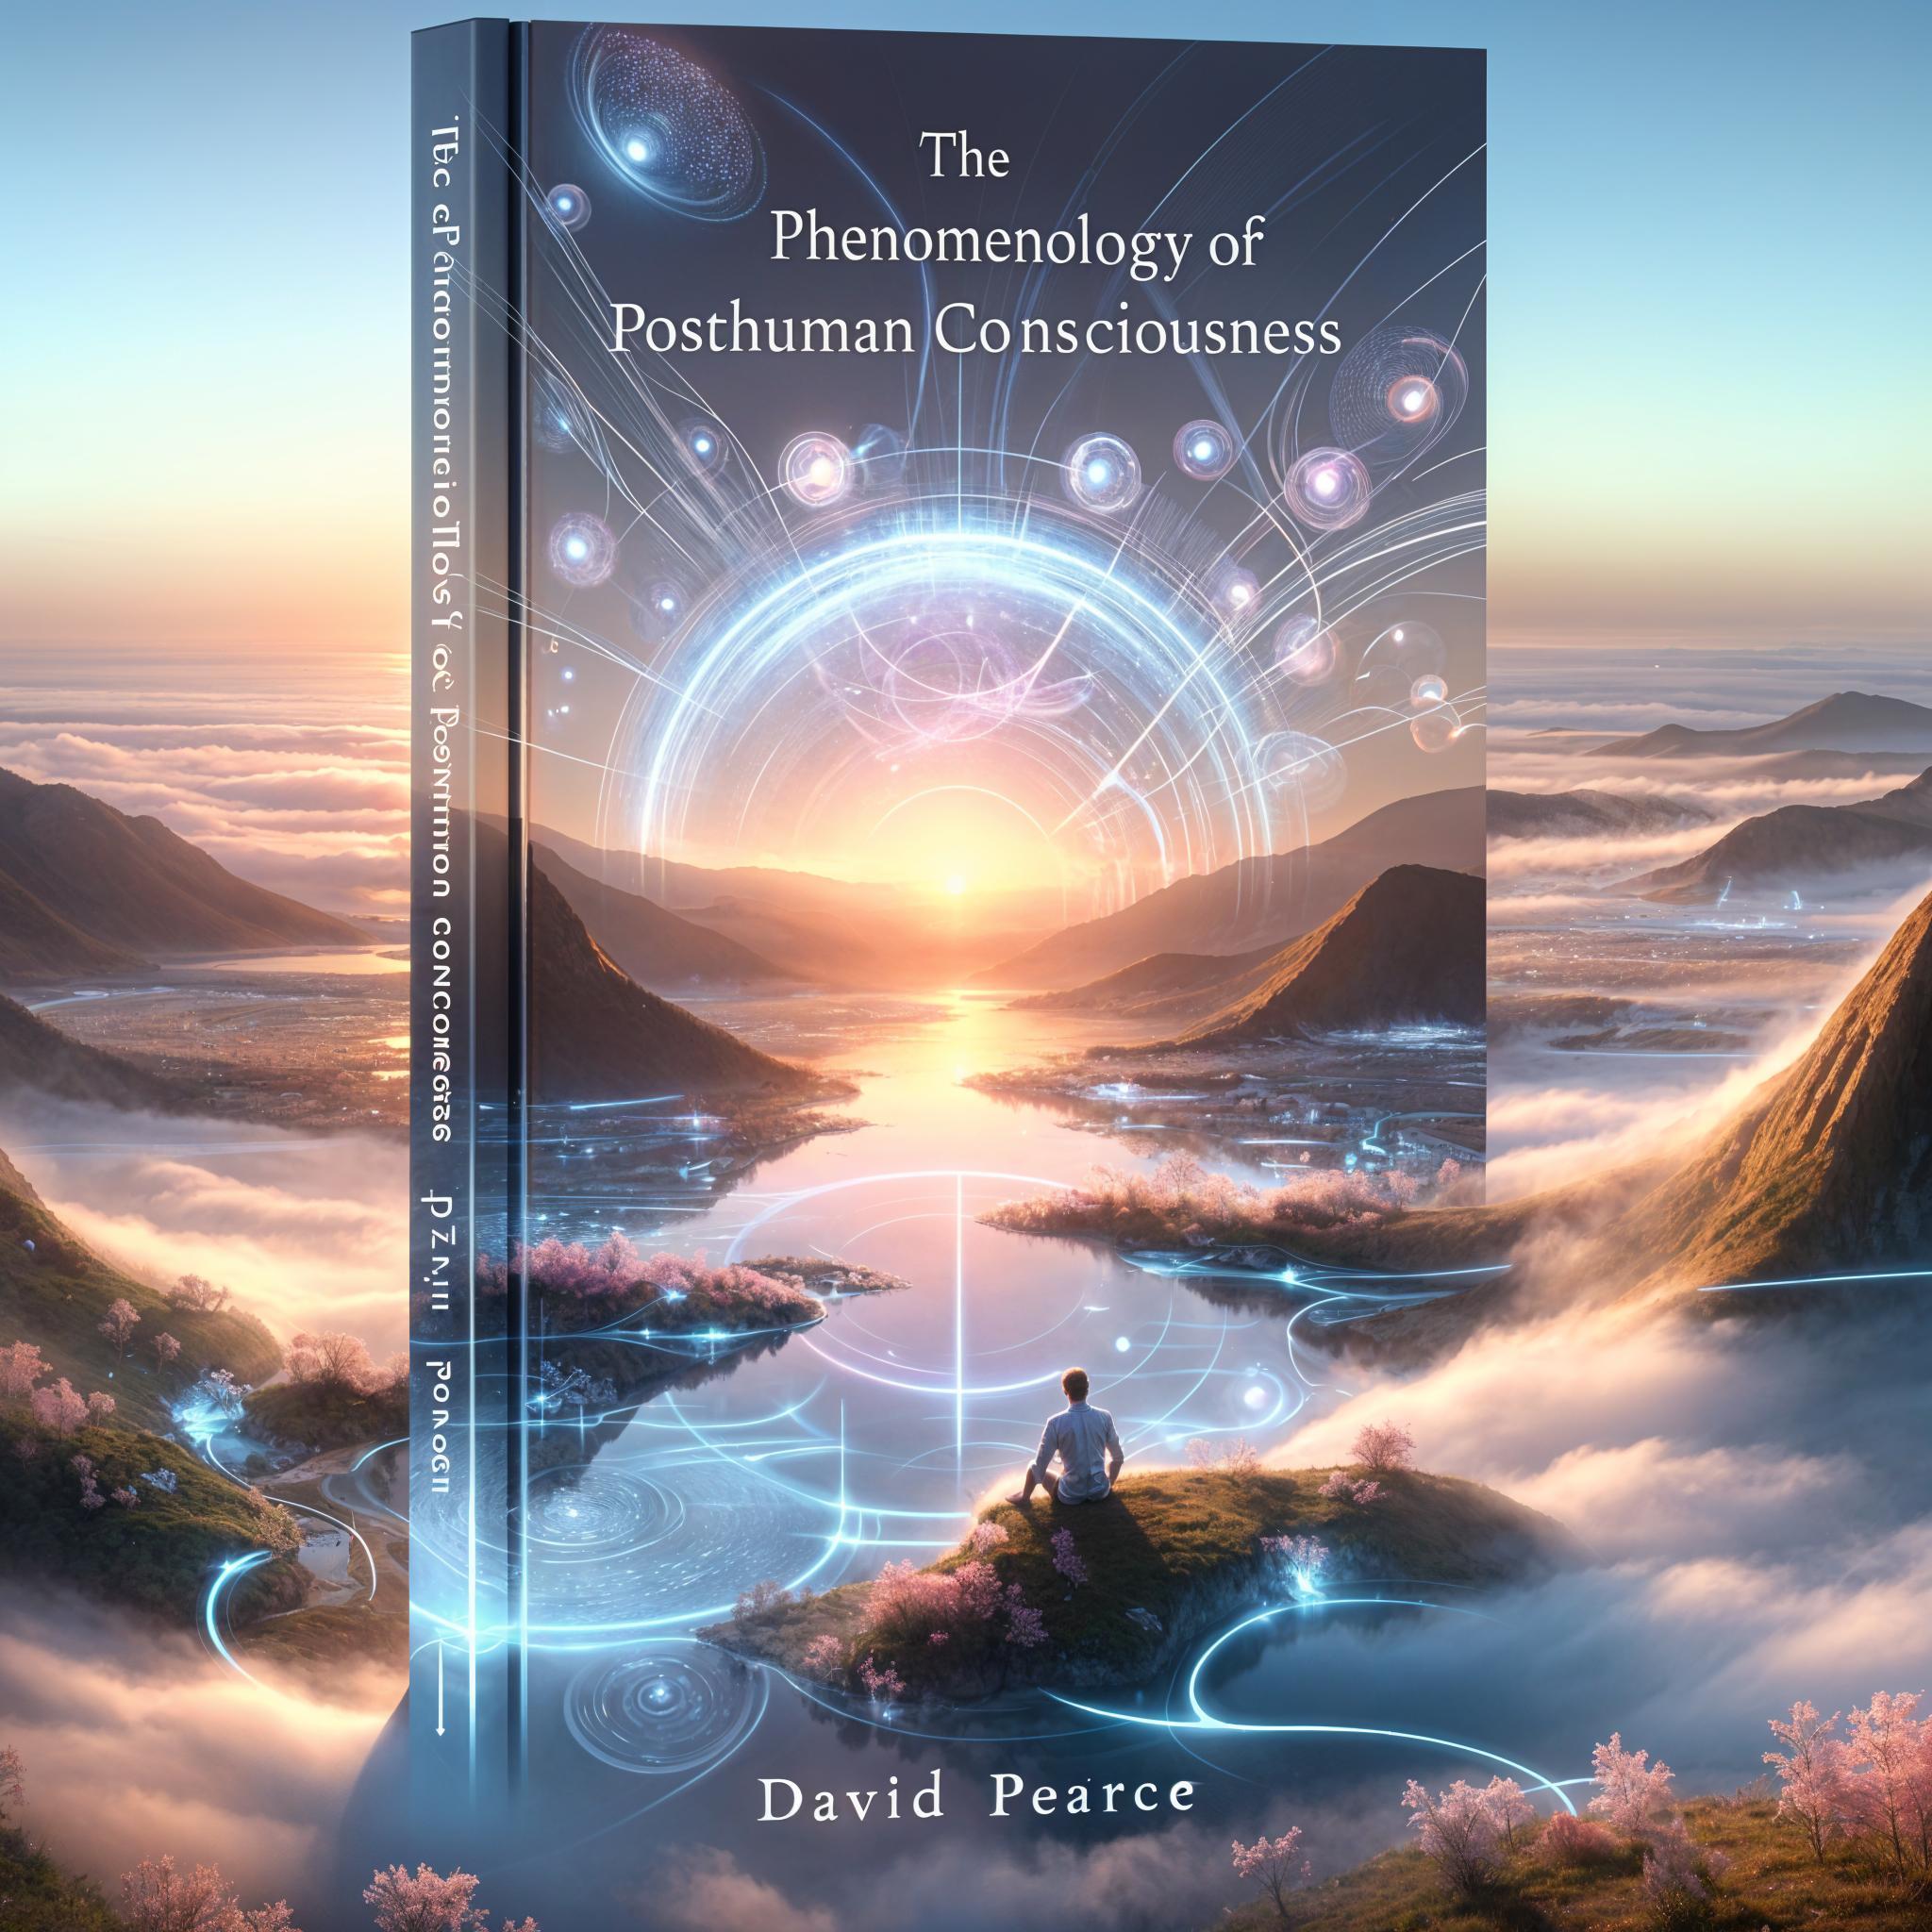 The Phenomenology of Posthuman Consciousness by David Pearce